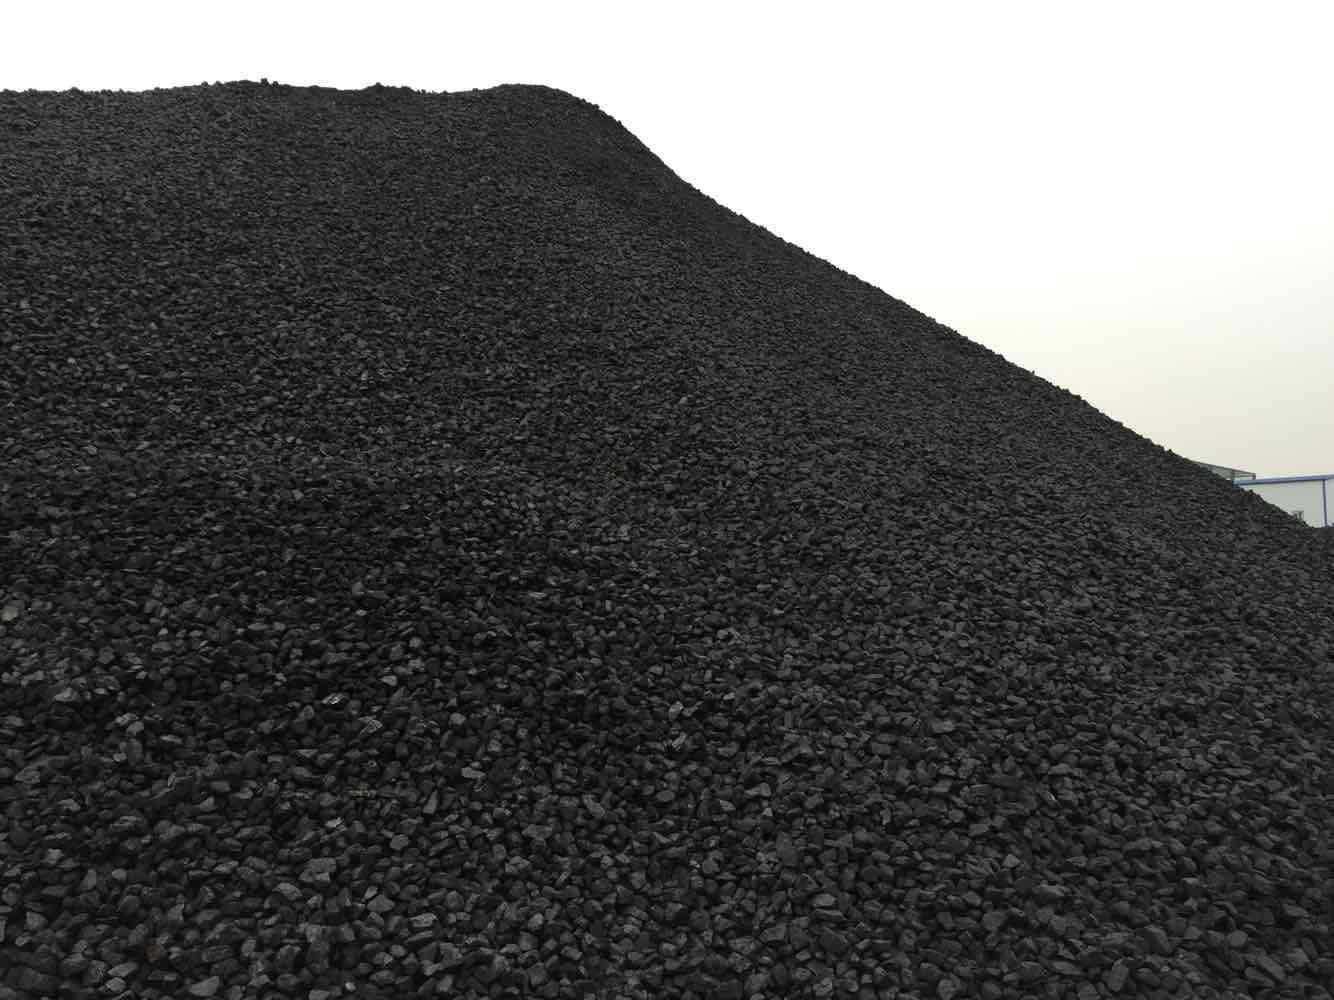 Datong Coal Group New out Datong high quality 36 Seed coal 6000 Kcal